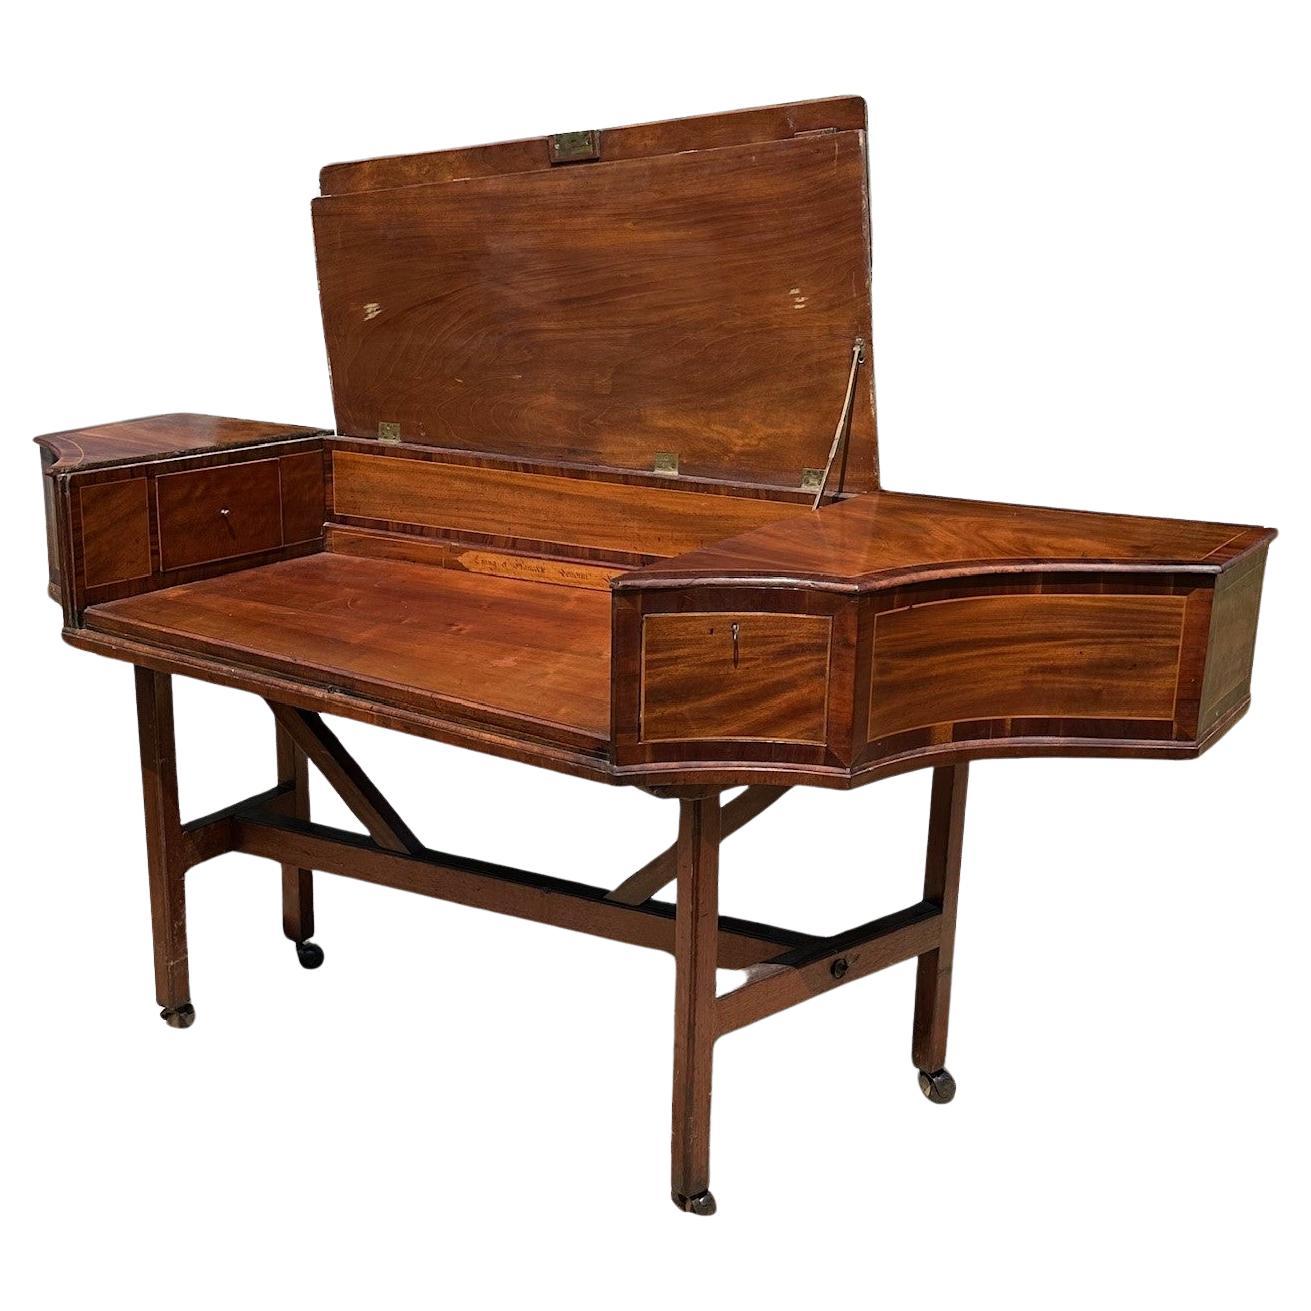 English 18th C. Spinet Case by Crang & Hancock London Converted Writing Desk For Sale